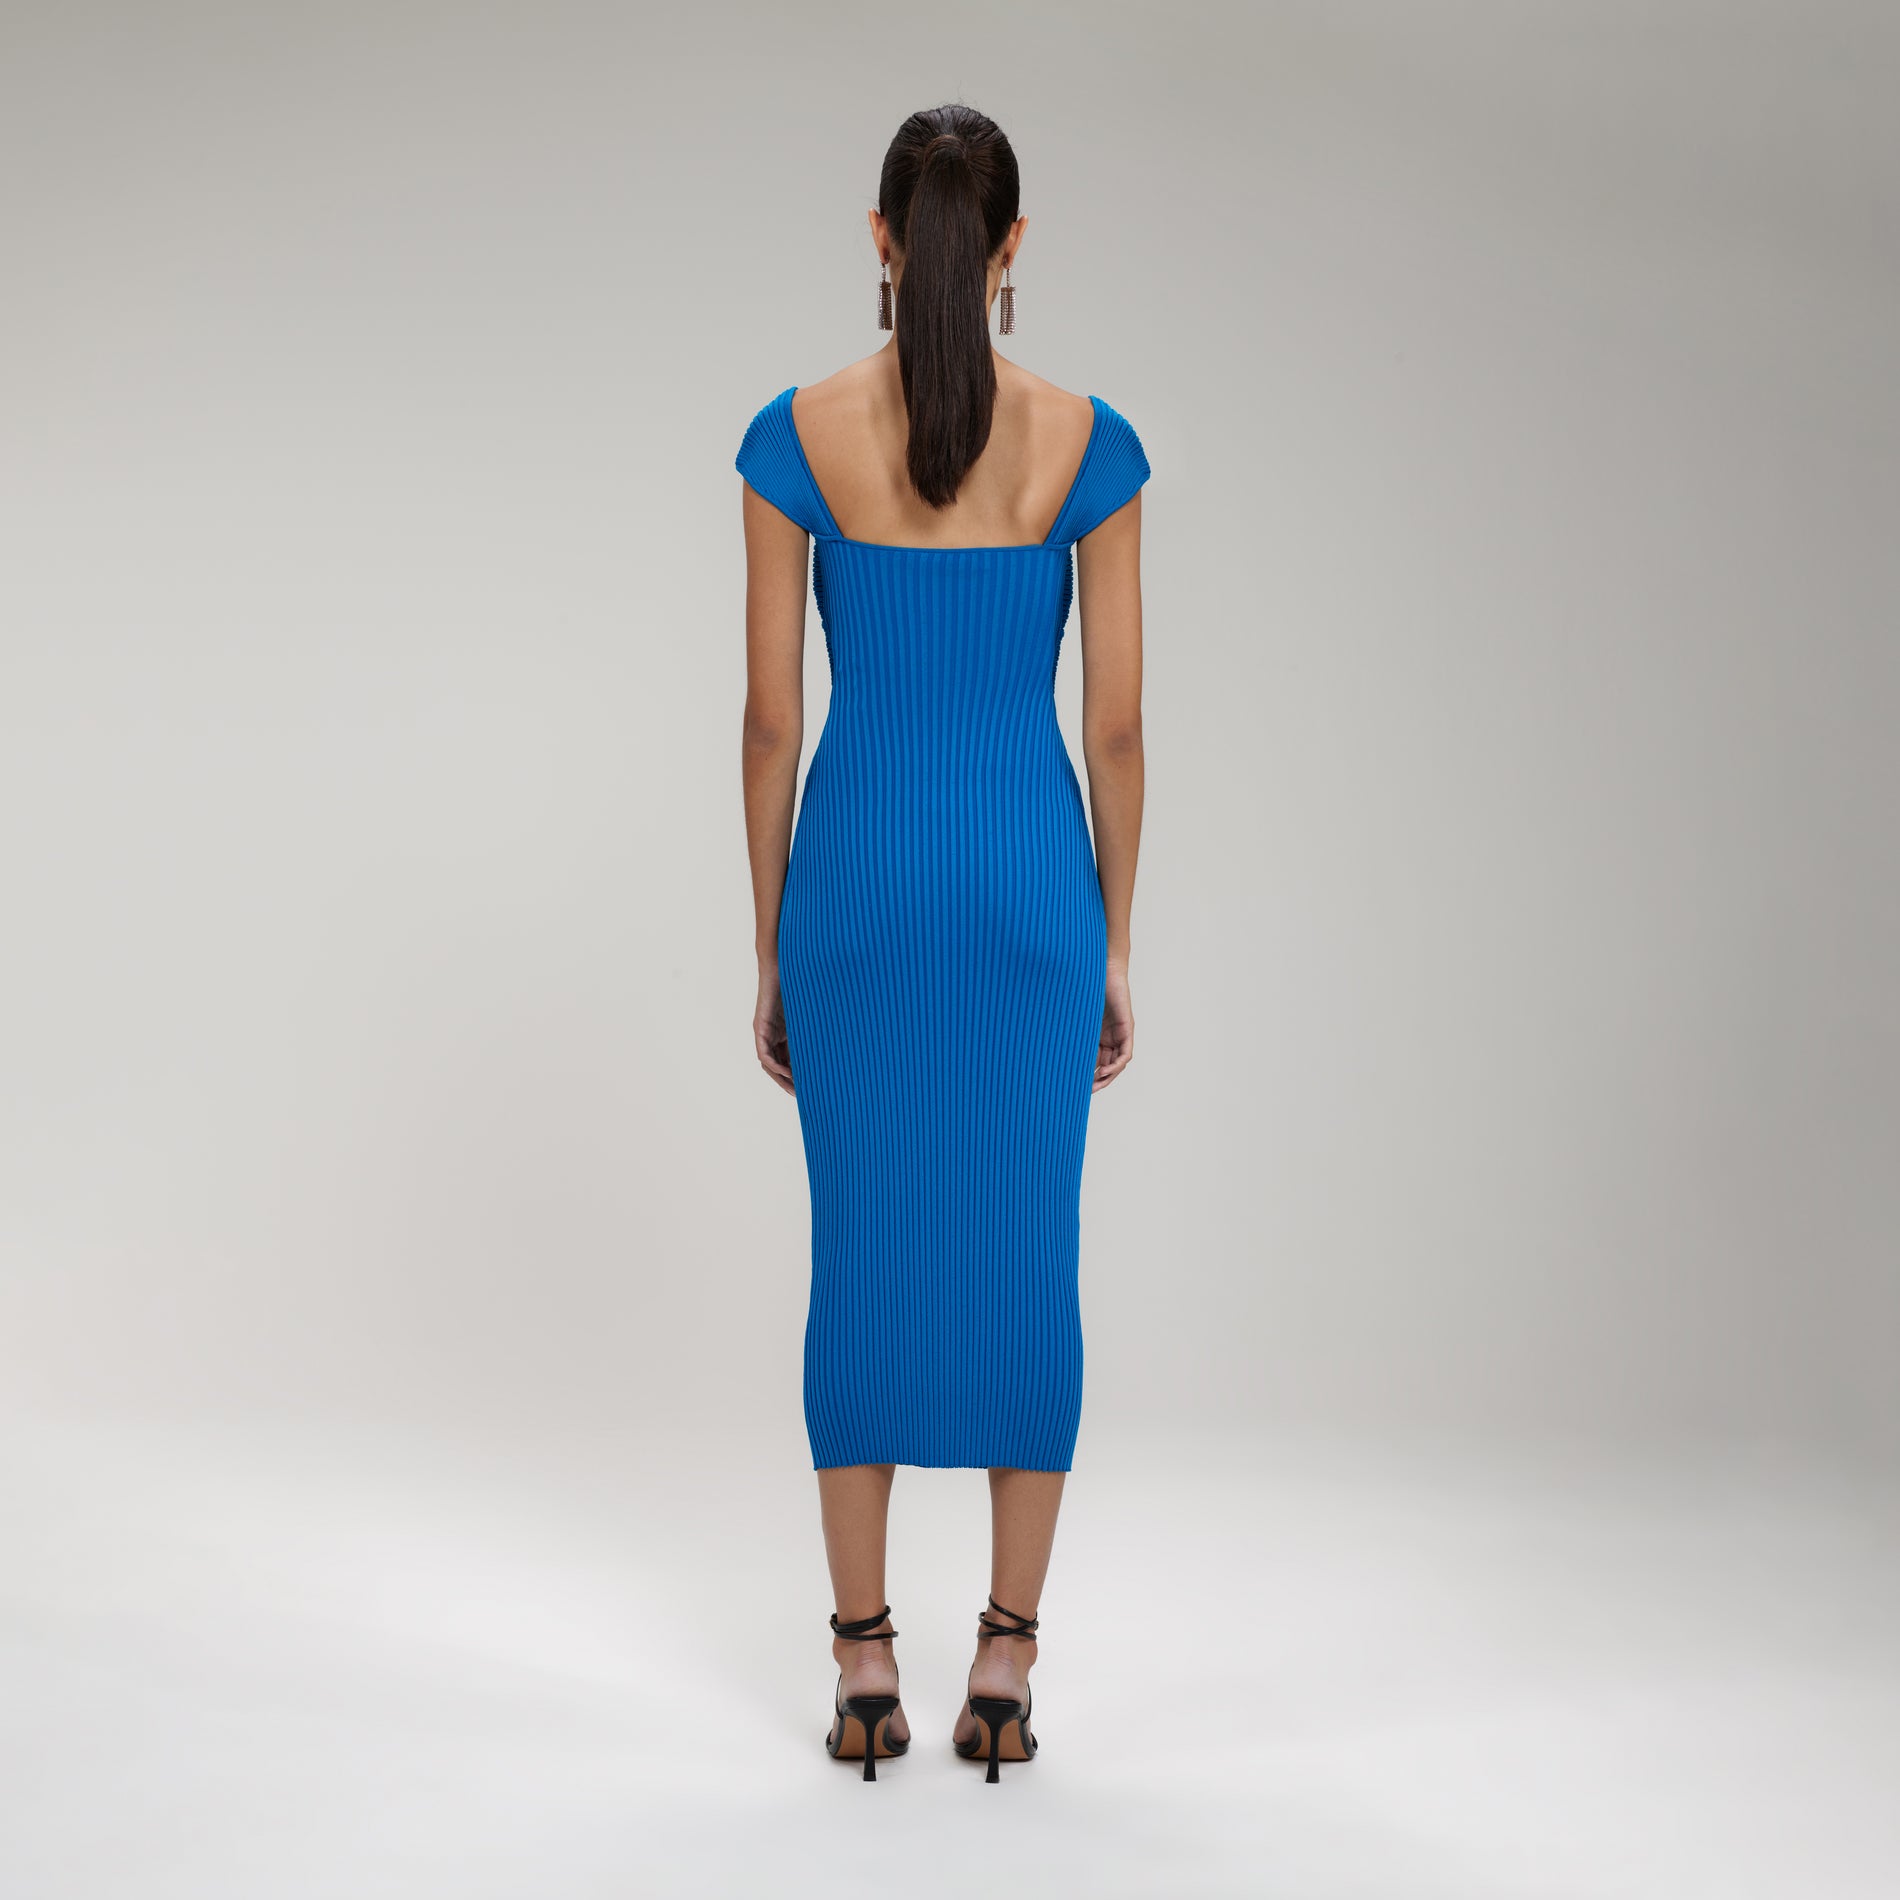 A woman wearing the Bright Blue Ribbed Knit Crossover Bust Midi Dress